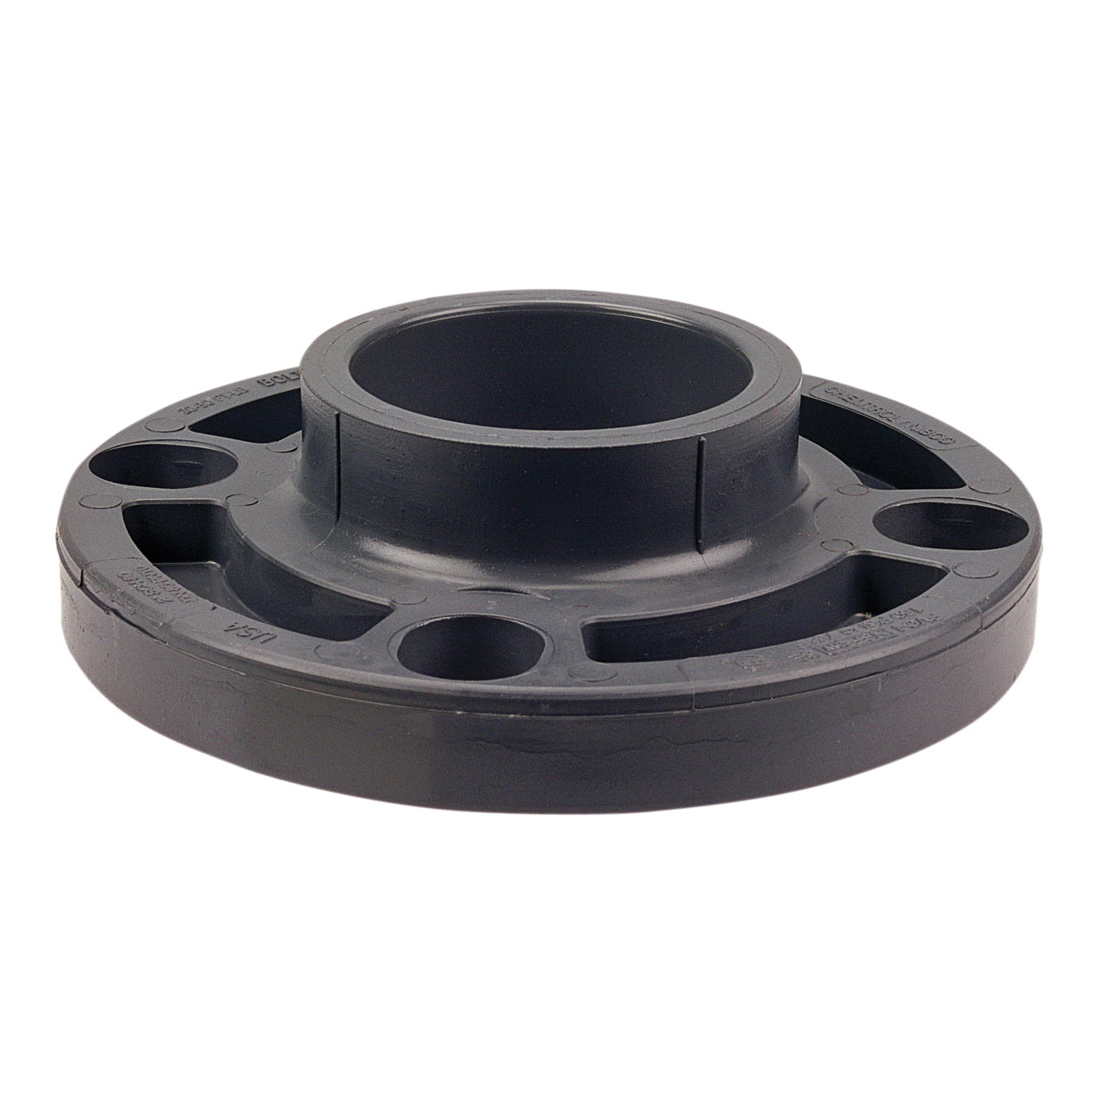 Chemtrol® CA23080 4551-W 1-Piece Webbed Flange, 3 in Nominal, PVC, Female Socket Connection, 150 lb, Domestic